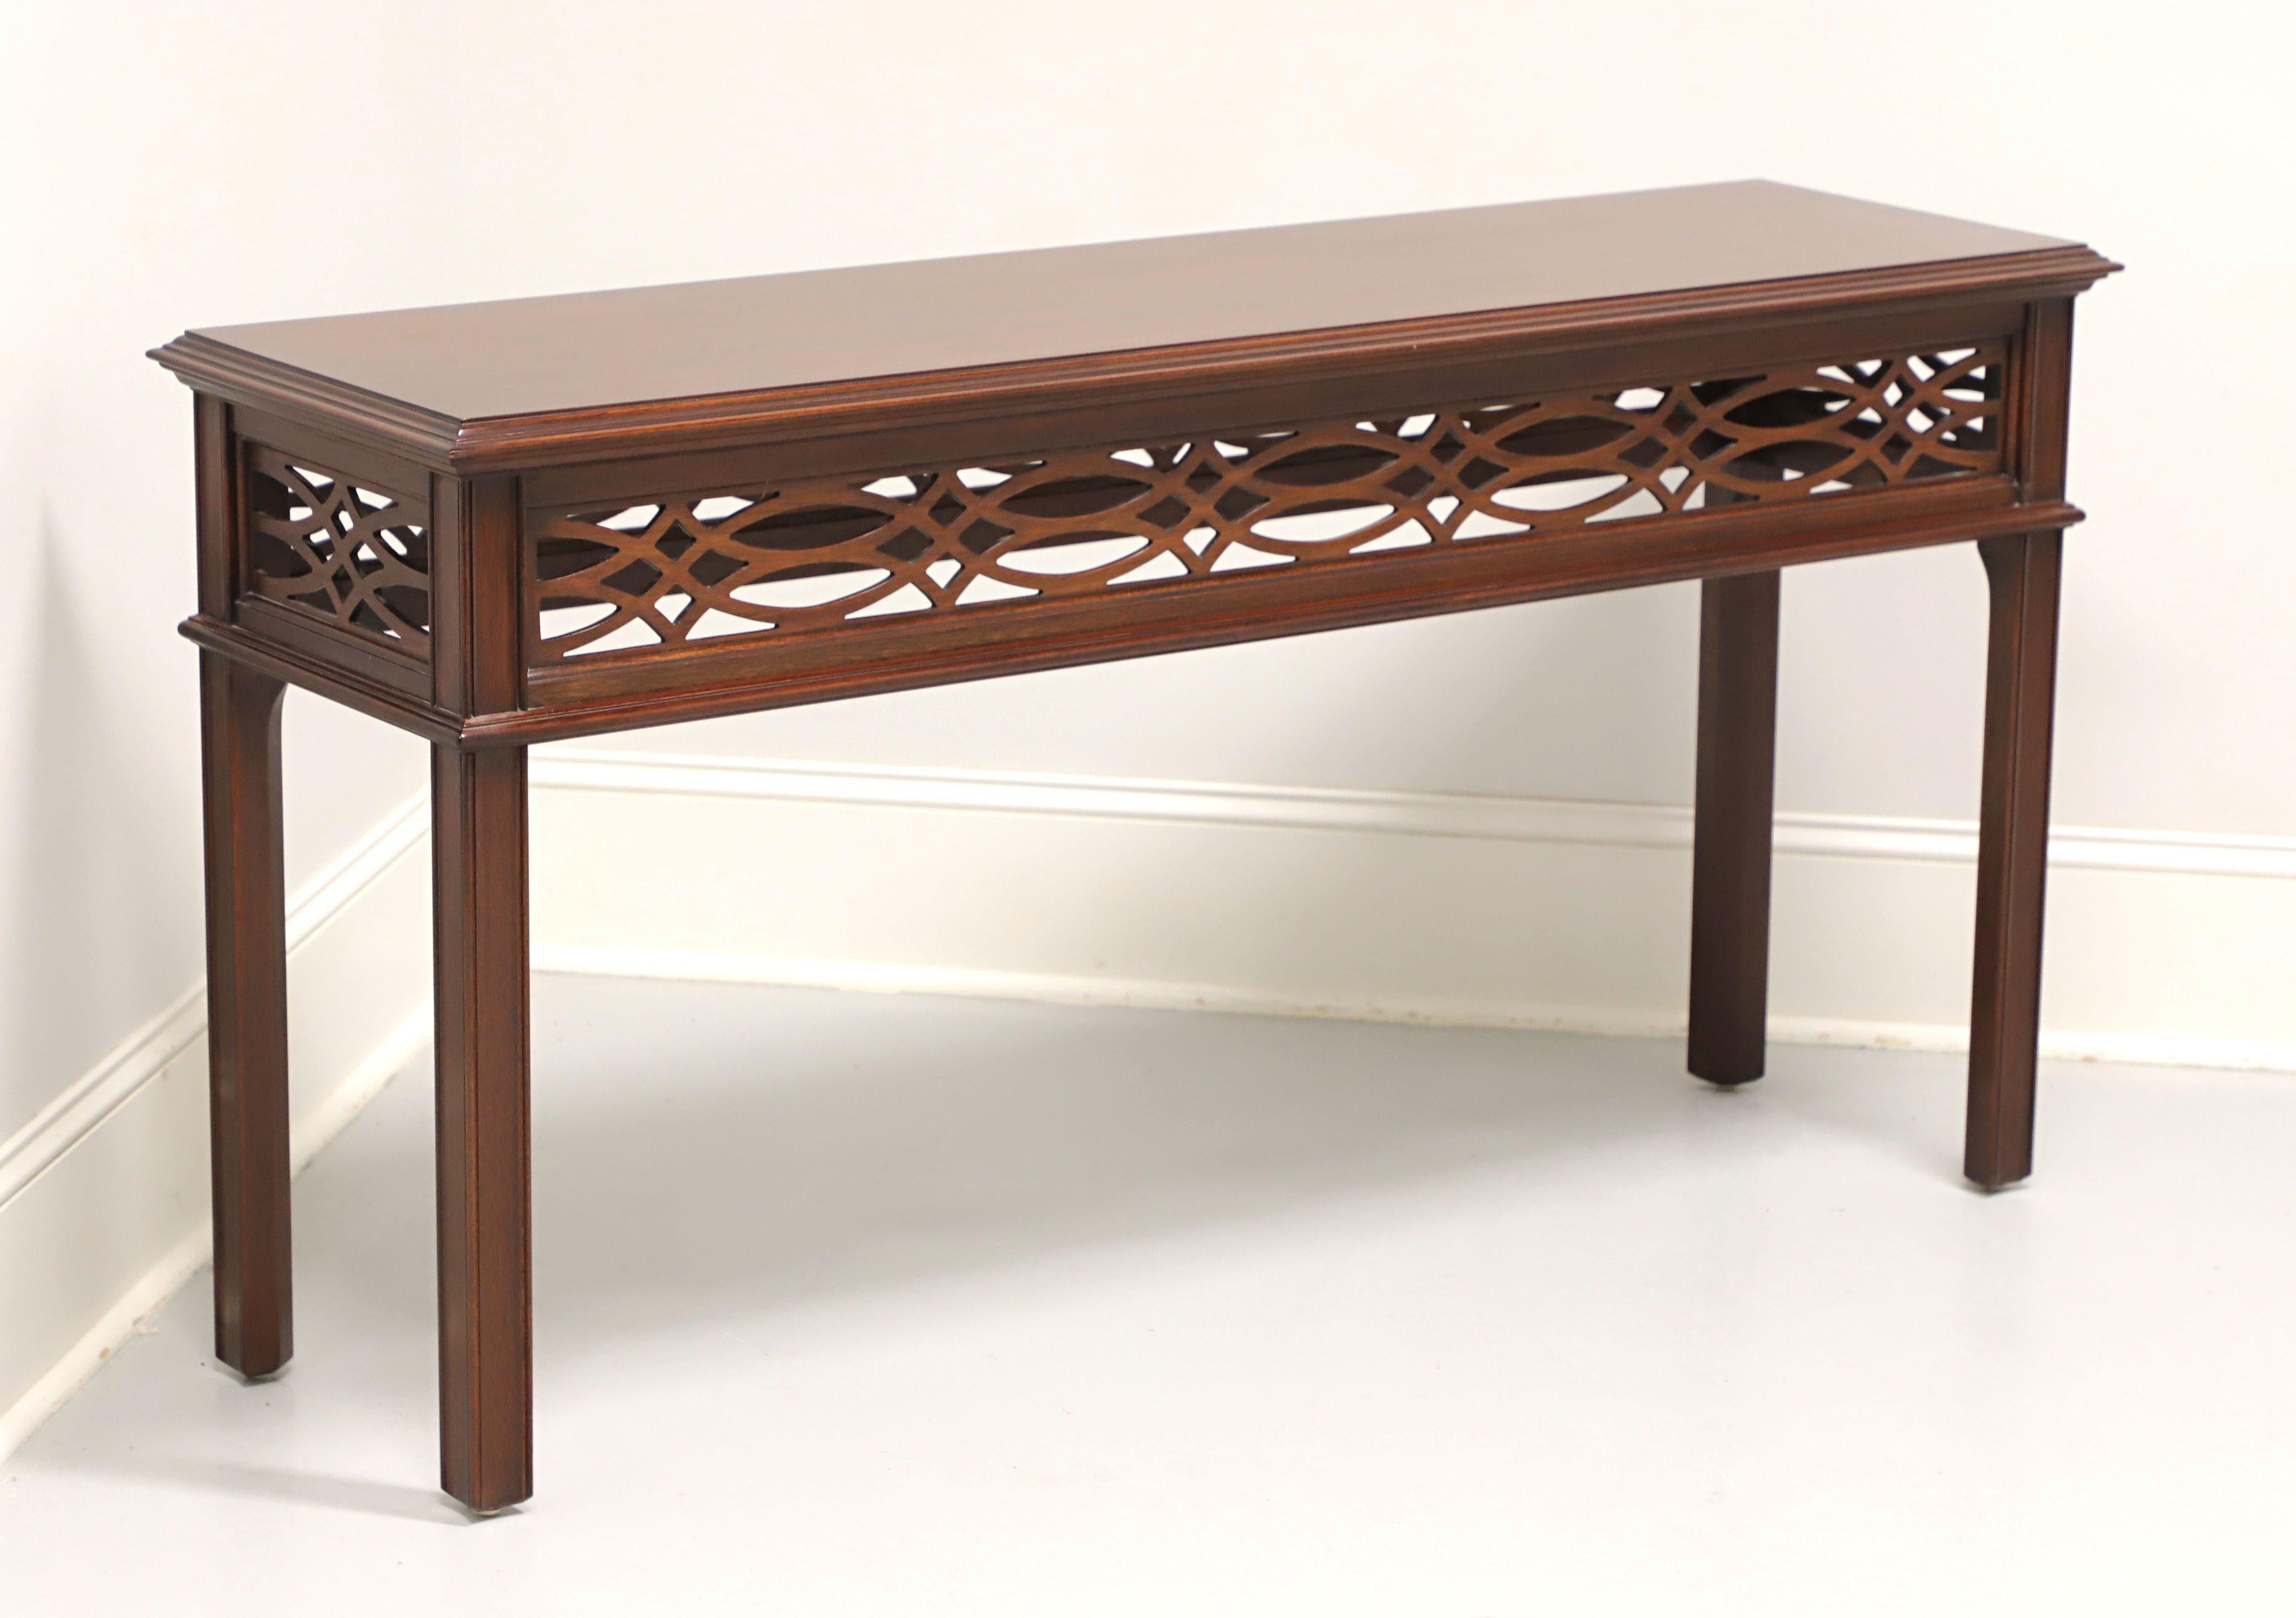 HENKEL HARRIS 5710 29 Mahogany Chinese Chippendale Console Sofa Table 4